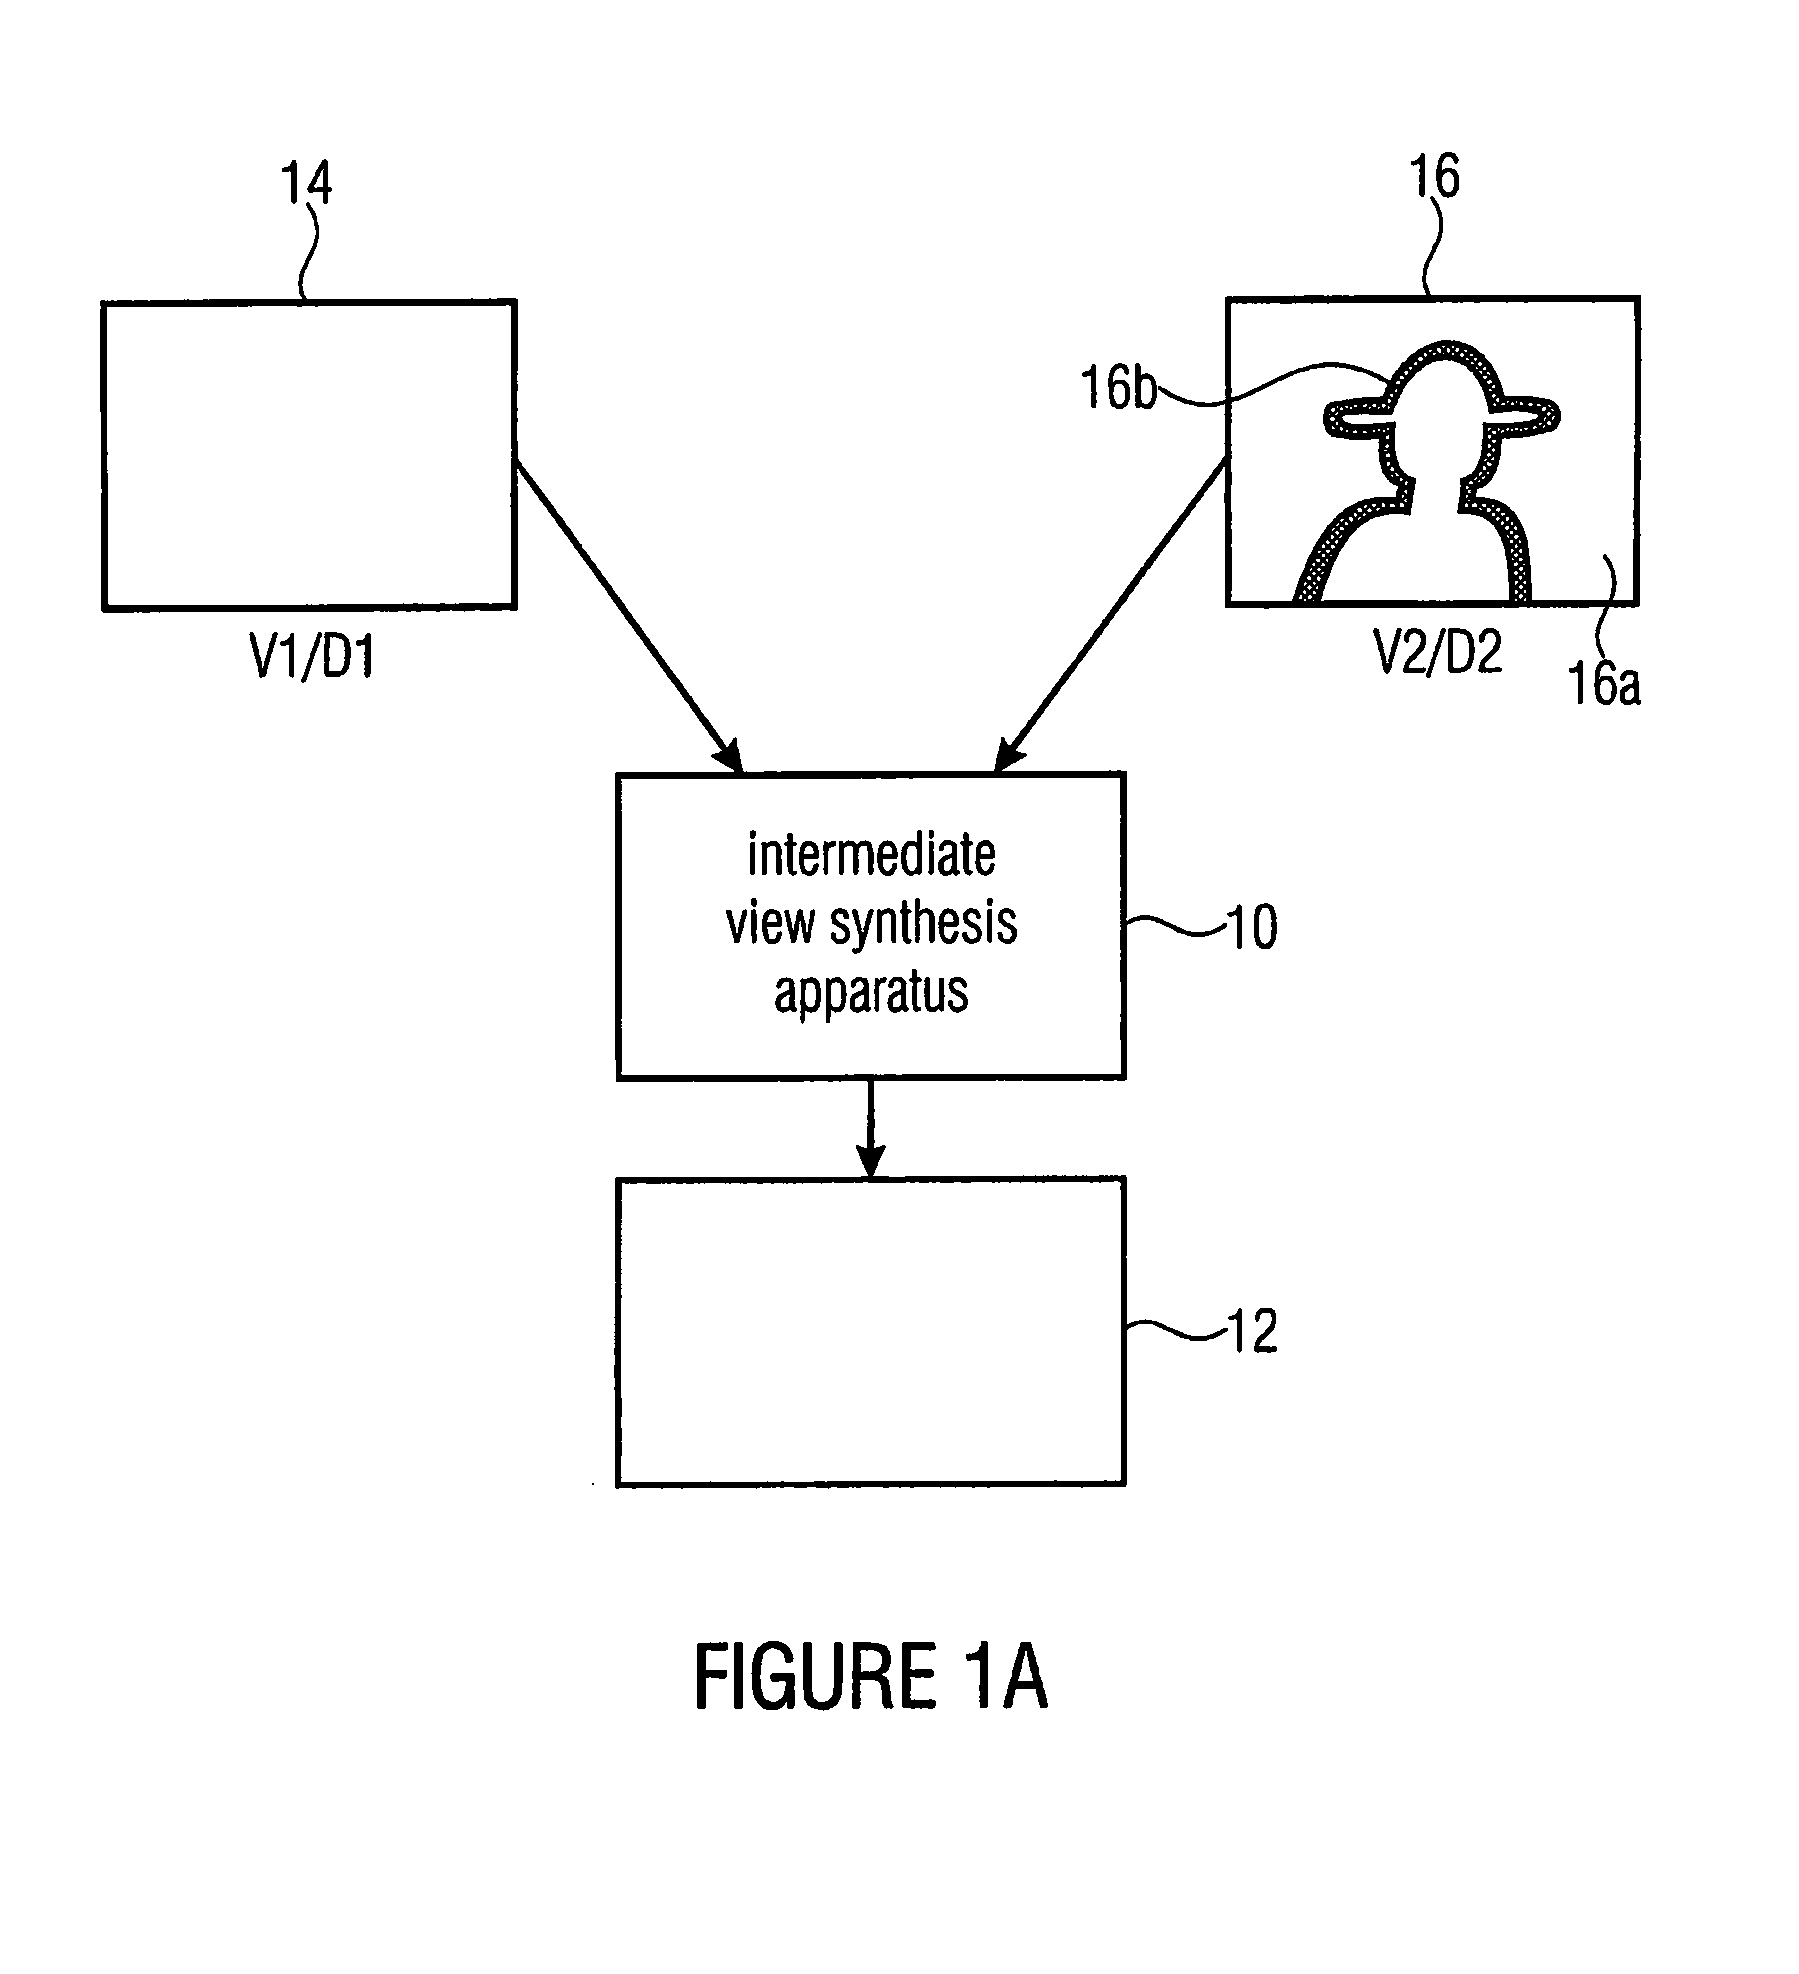 Intermediate view synthesis and multi-view data signal extraction